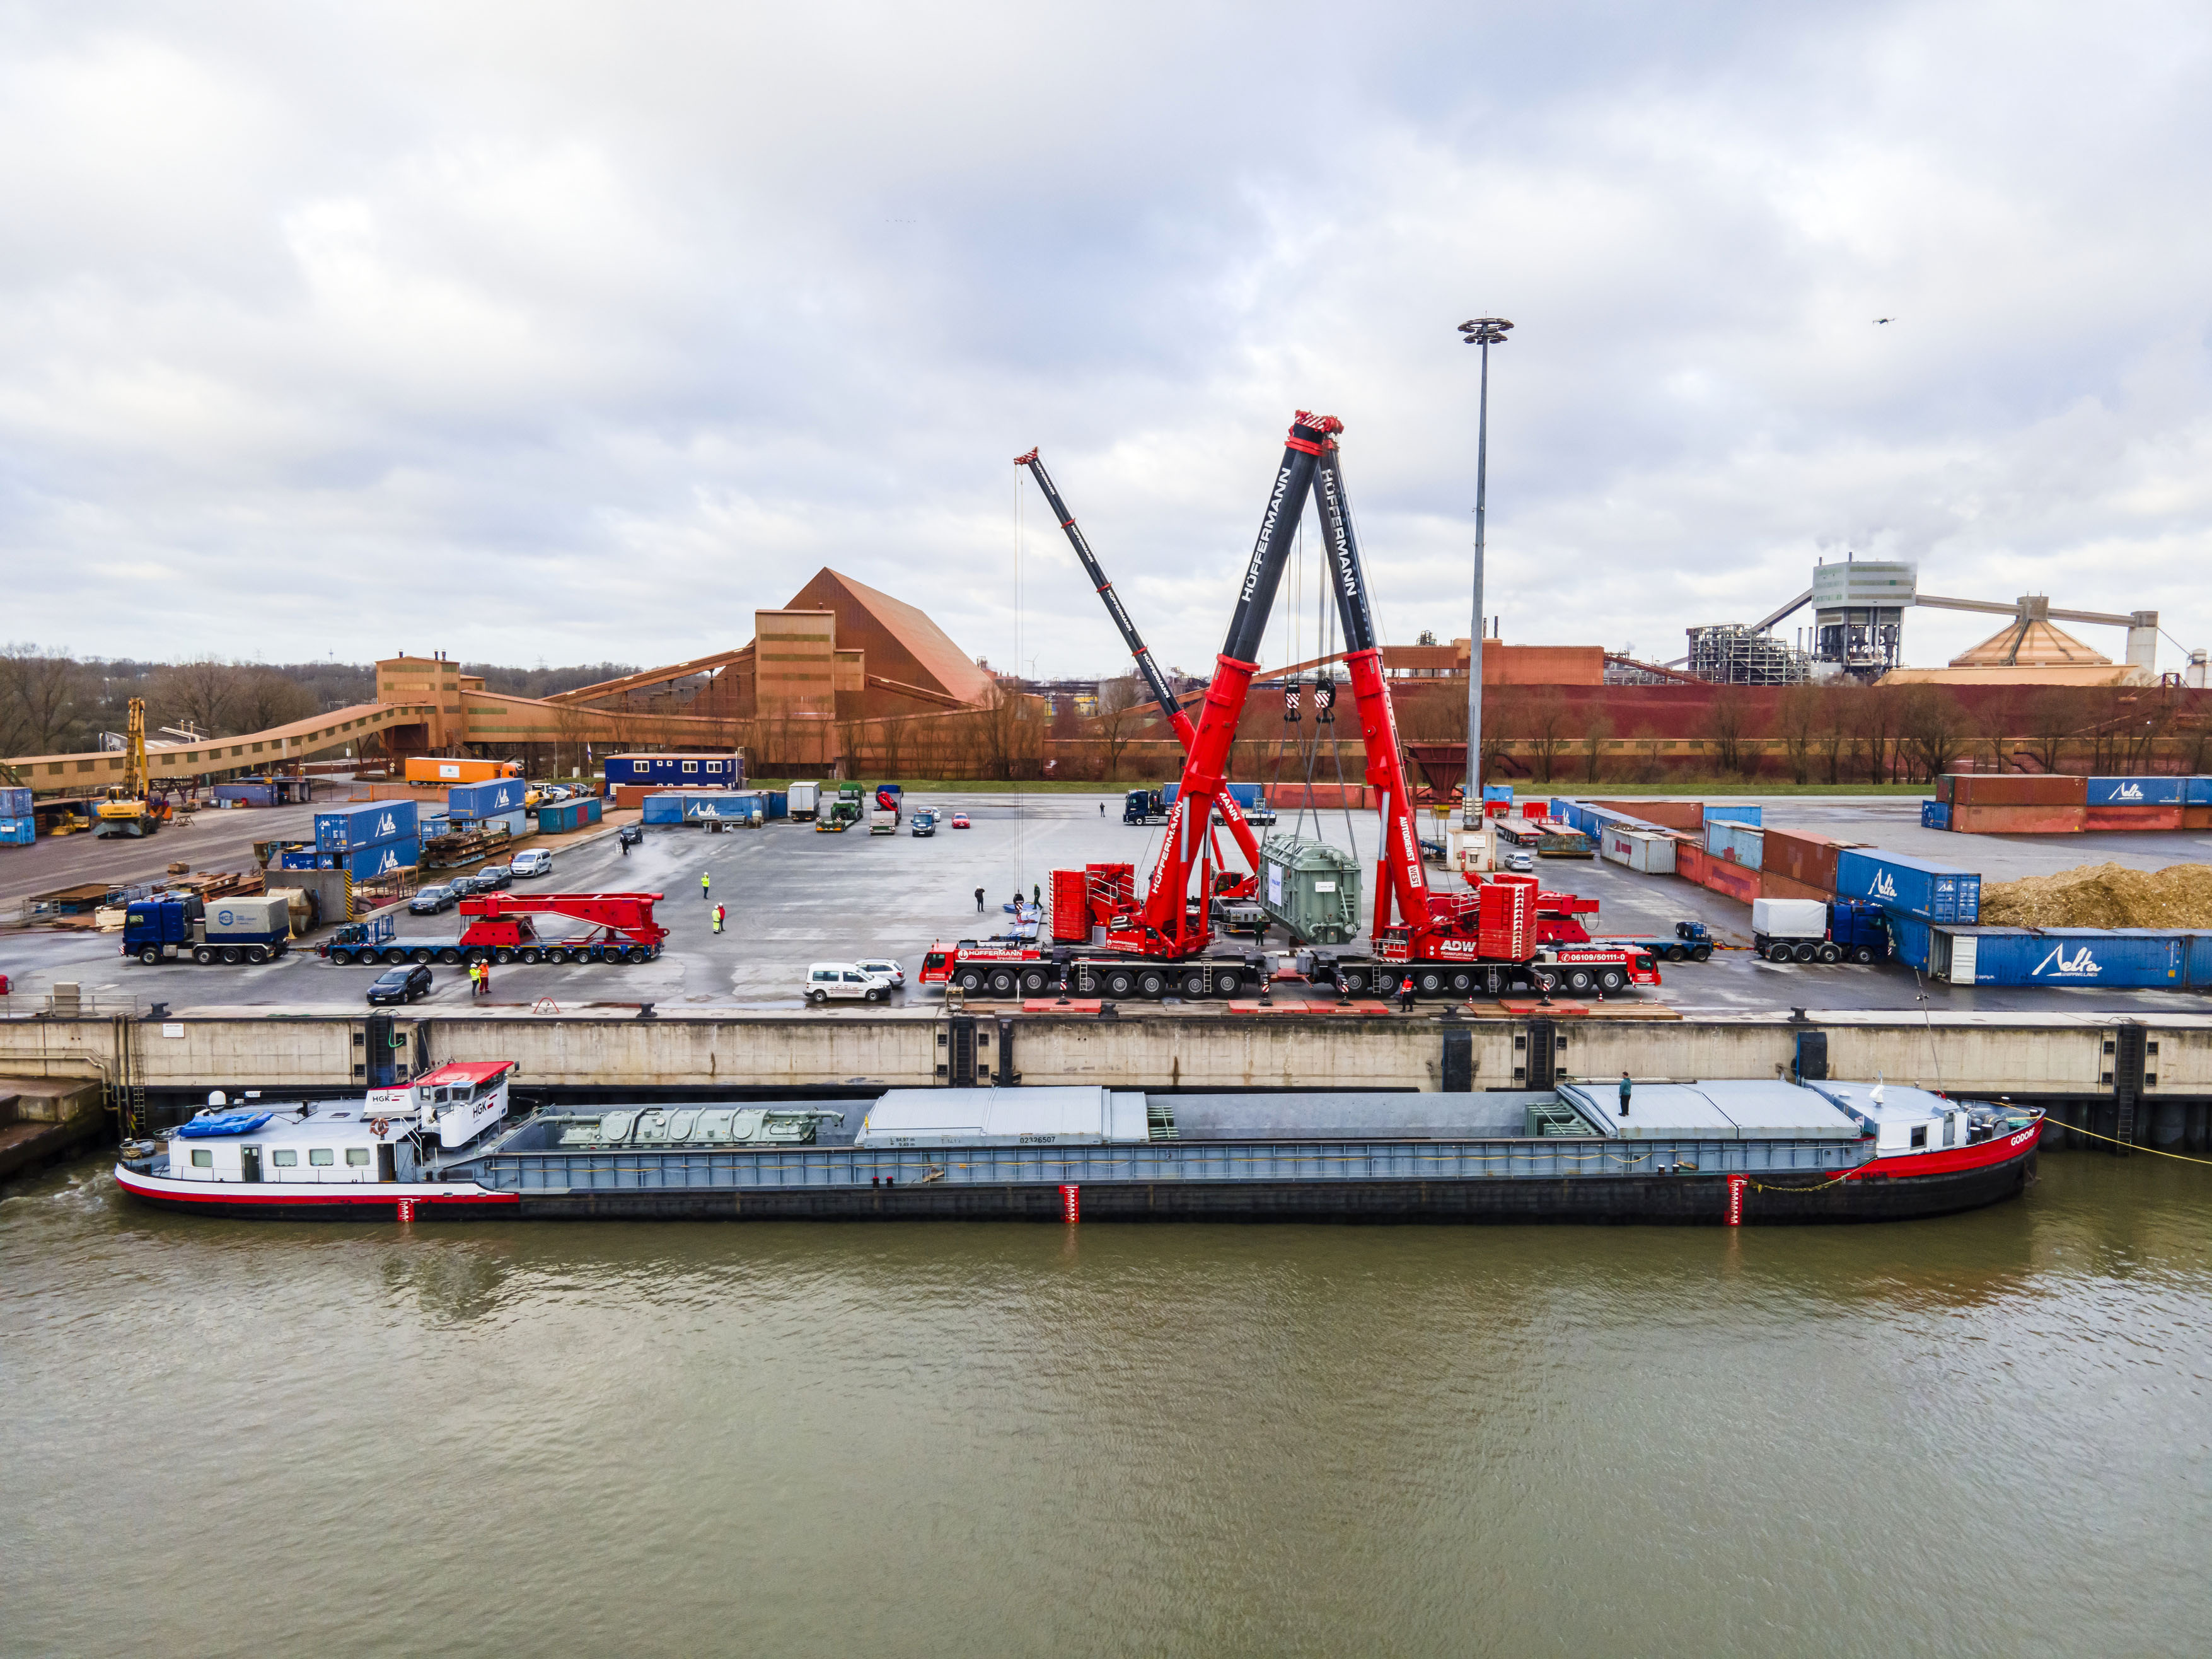 Heavy load with tandem lift: Two LTM 1500-8.1 unload 235 tonne transformers at the Port of Stade. The LTM 1160-5.2 in the background is used for assembly work.